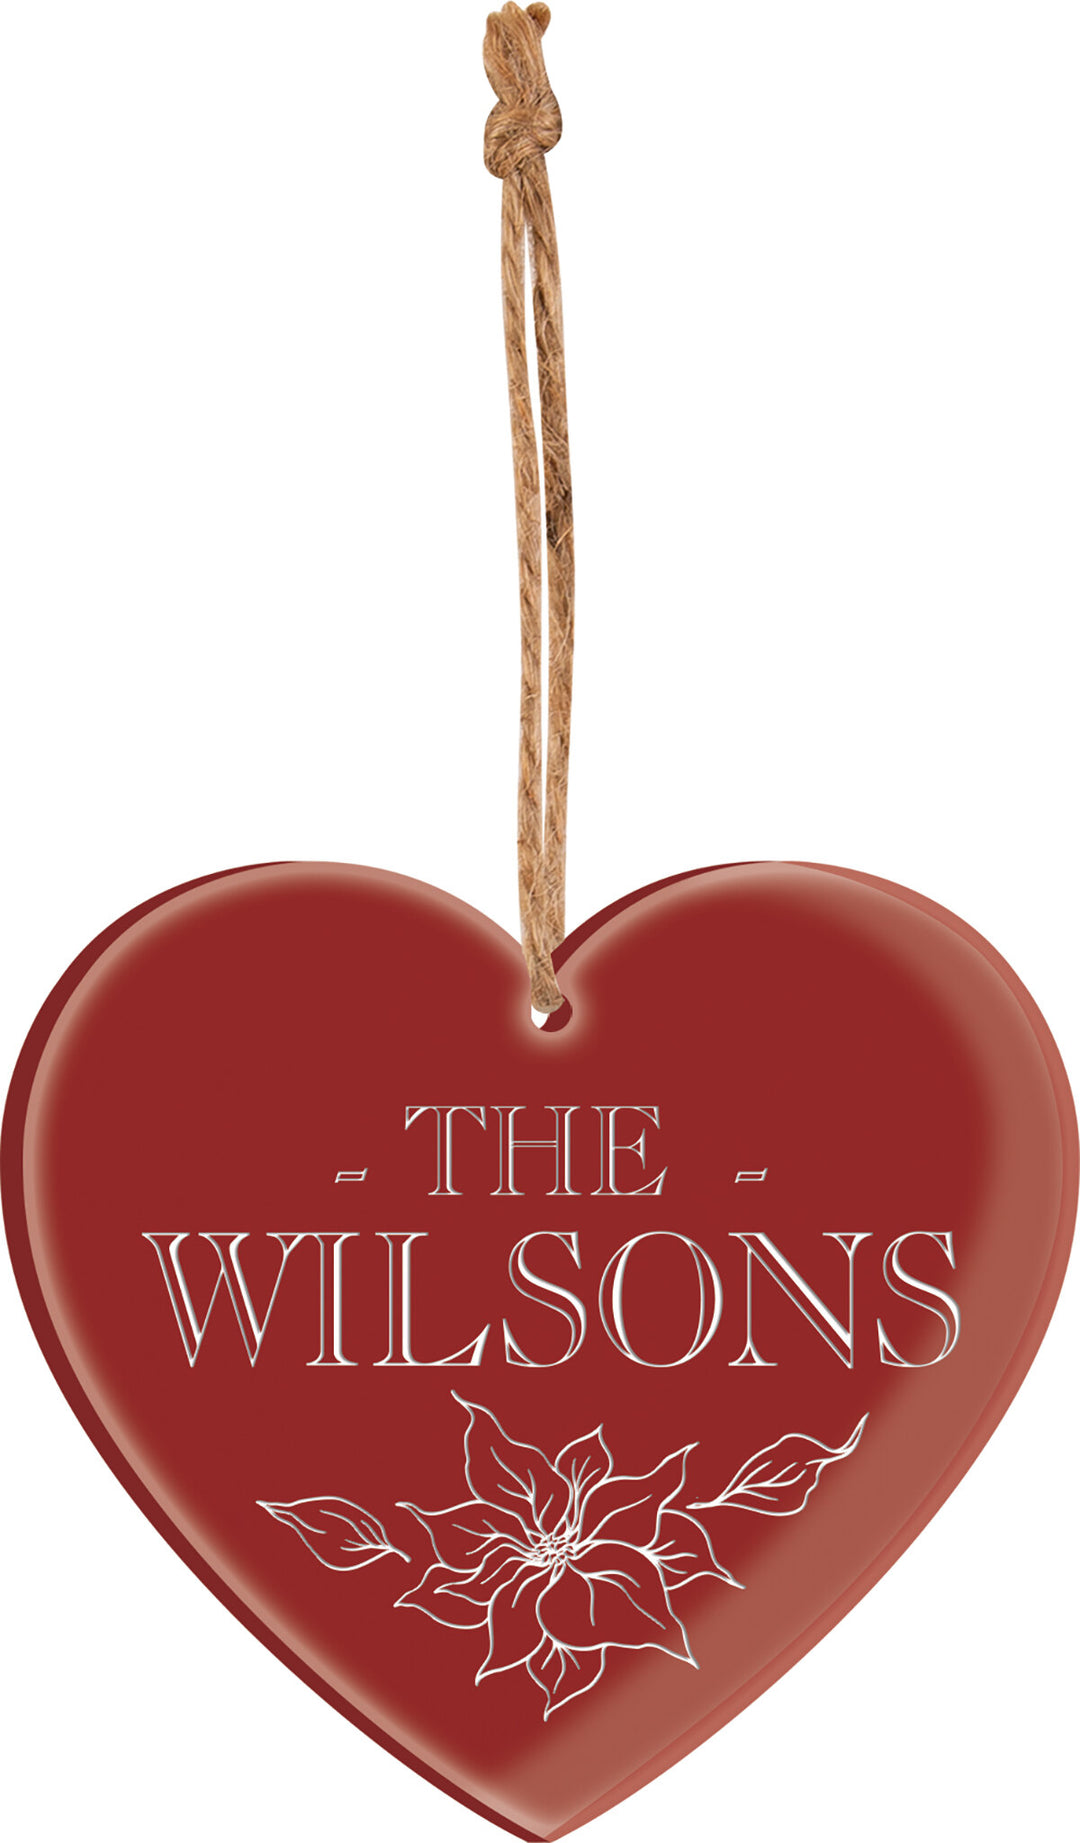 Personalized Heart Acrylic Ornament